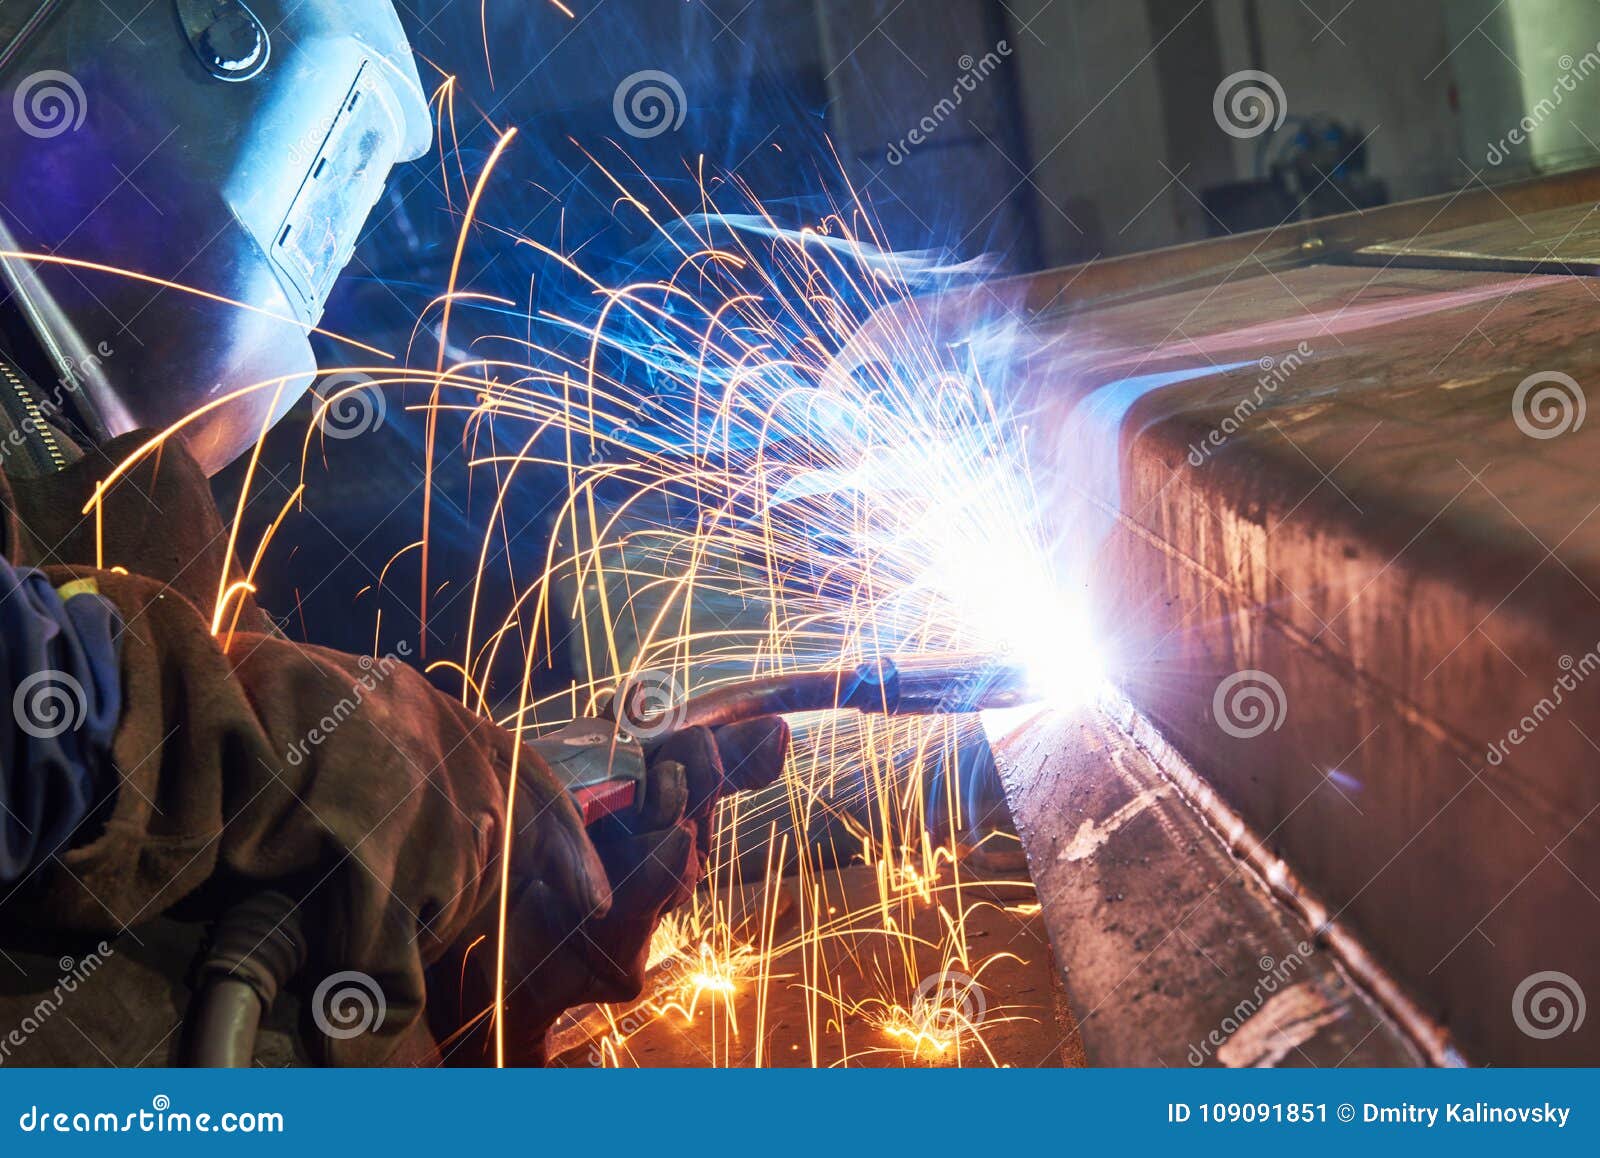 Industrial Arc Welding Work Stock Image Image Of Protection Heavy 109091851